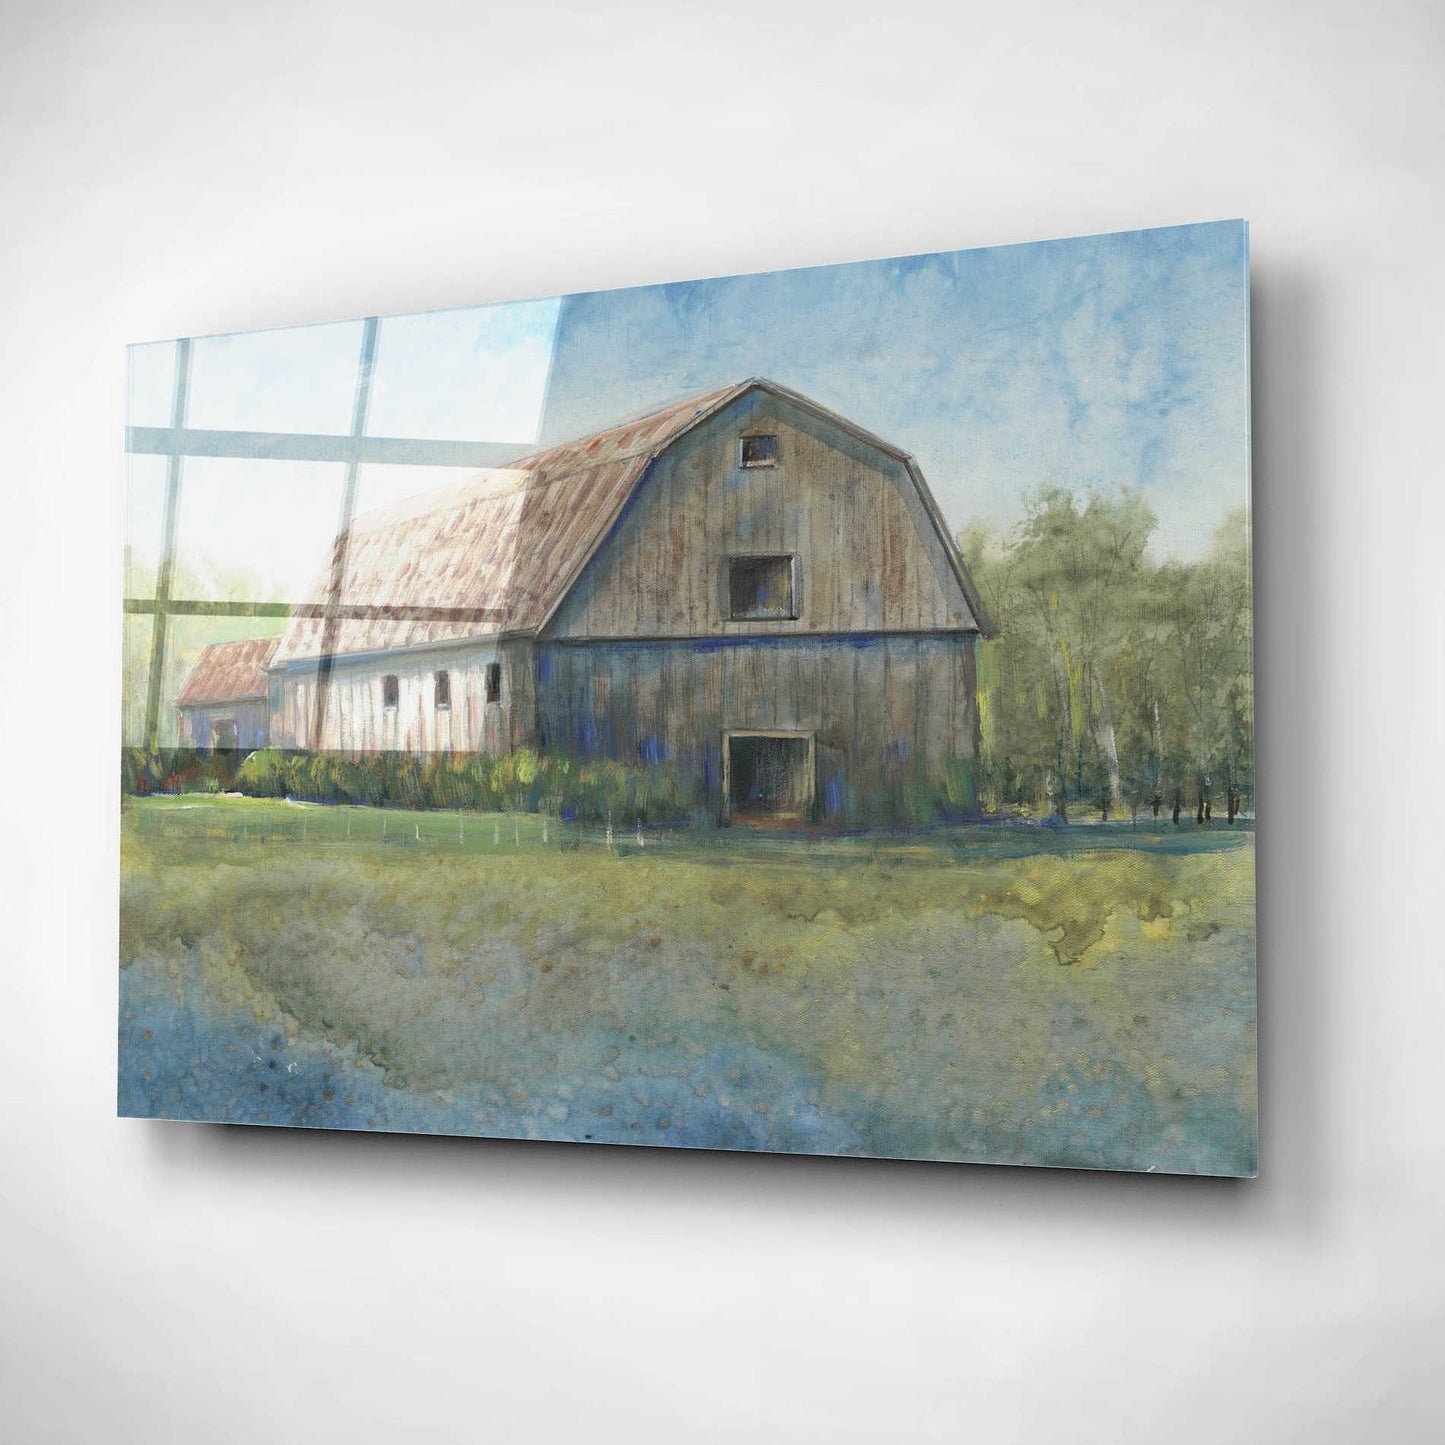 Epic Art 'Country Life I' by Tim O'Toole, Acrylic Glass Wall Art,16x12